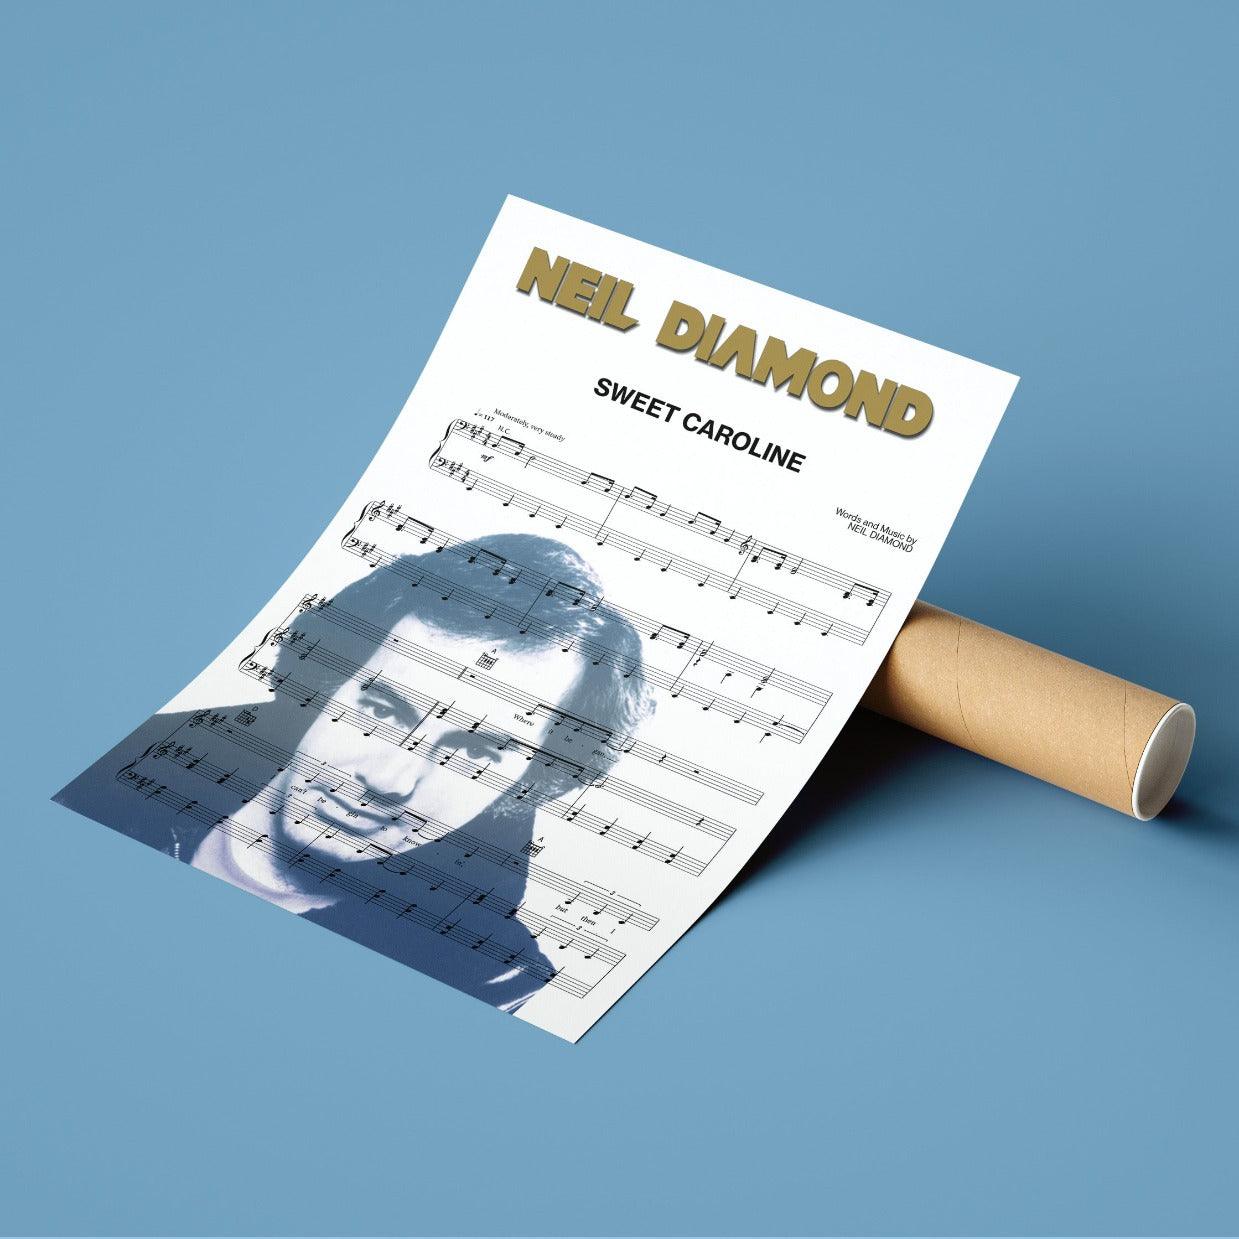 Neil Diamond - Sweet Caroline Song Music Sheet Notes Print Everyone has a favorite Song lyric prints and with Neil Diamond now you can show the score as printed staff. The personal favorite song lyrics art shows the song chosen as the score.